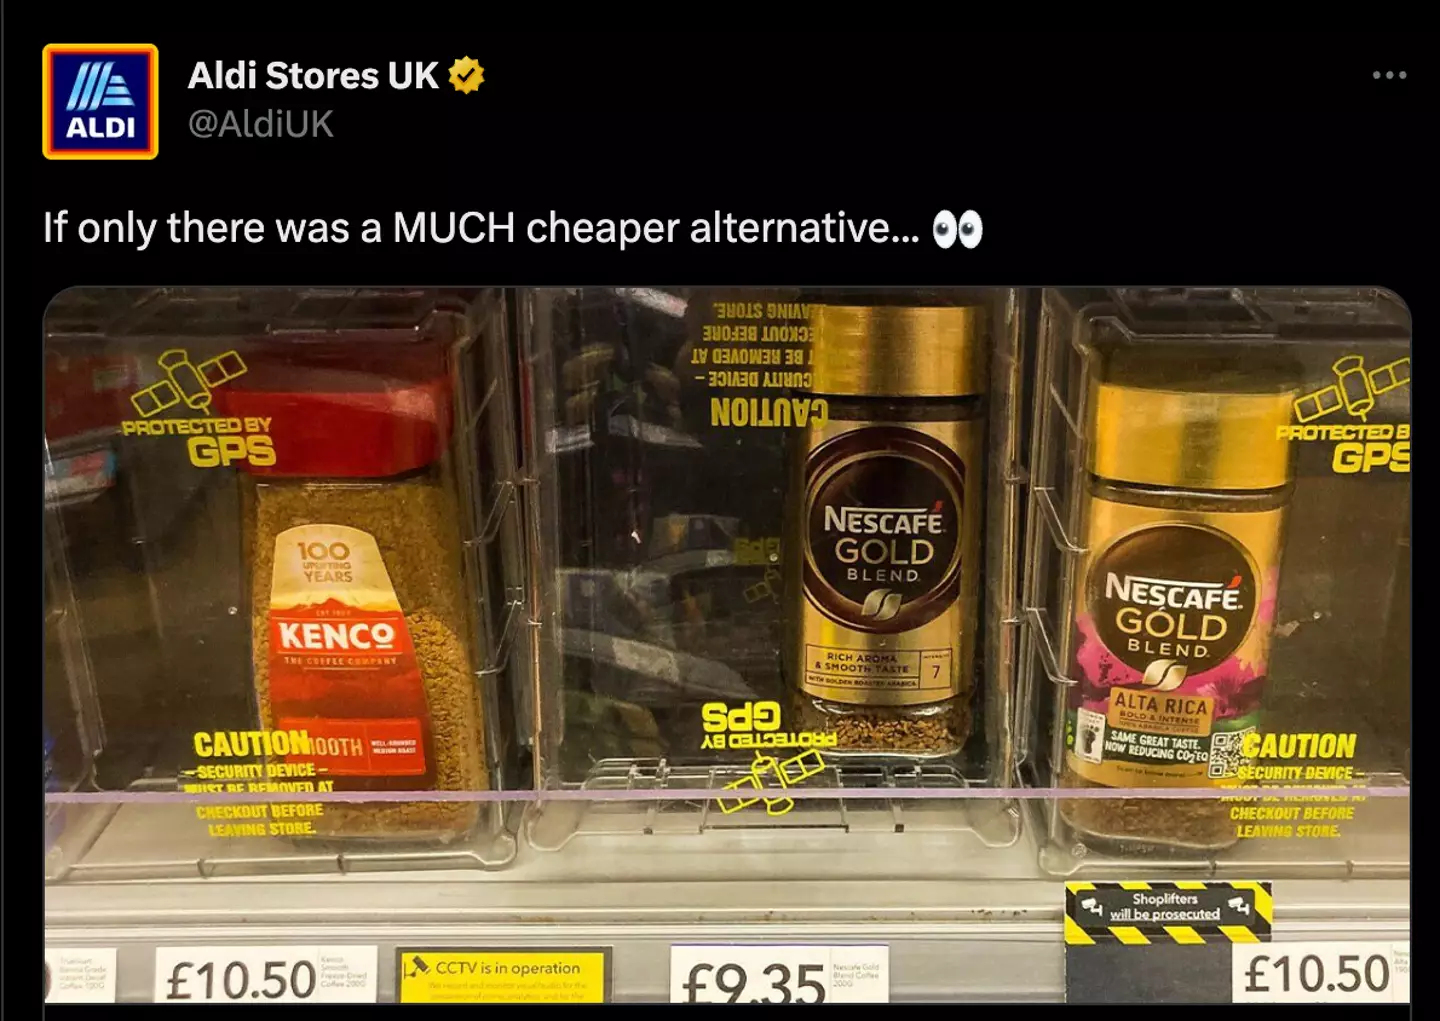 Aldi had a dig at the Co-op pricing.